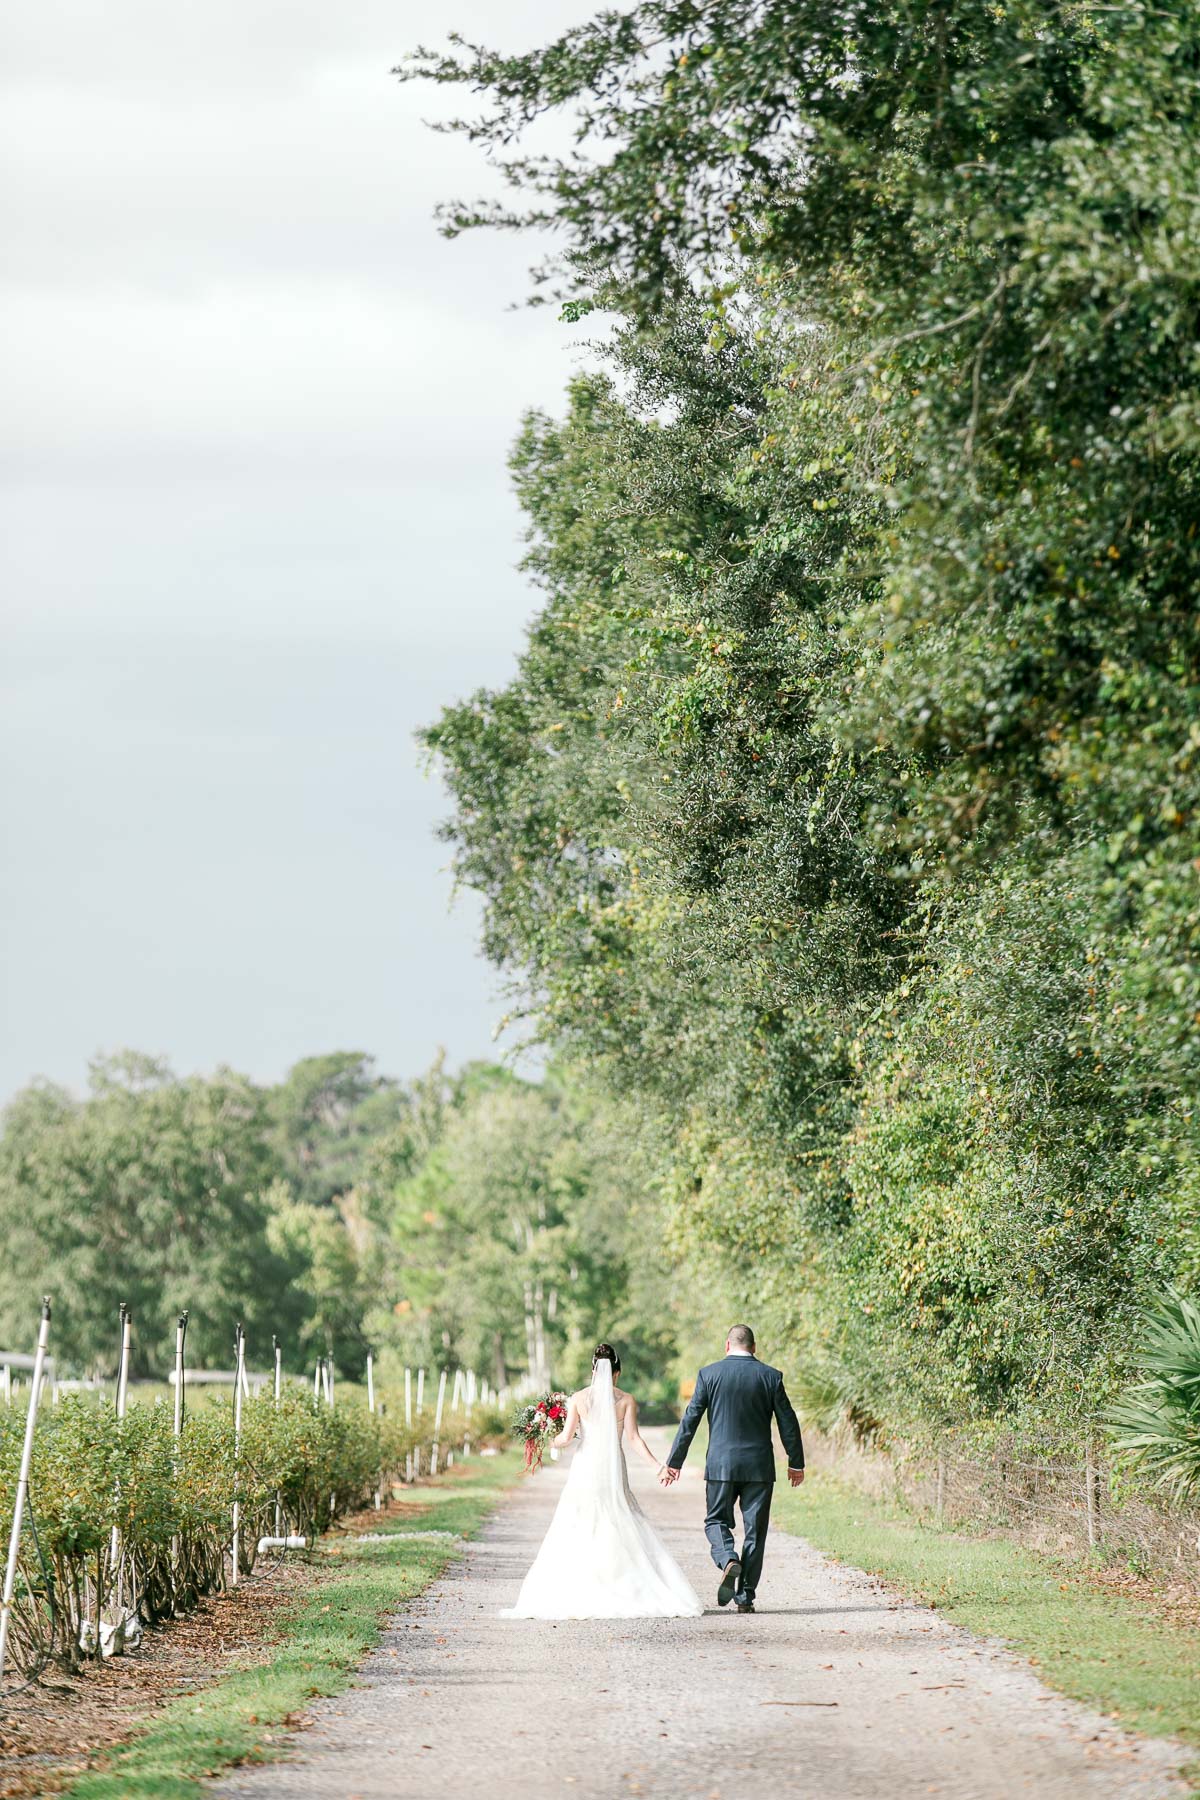 Bride and groom walking hand in hand down a dirt road